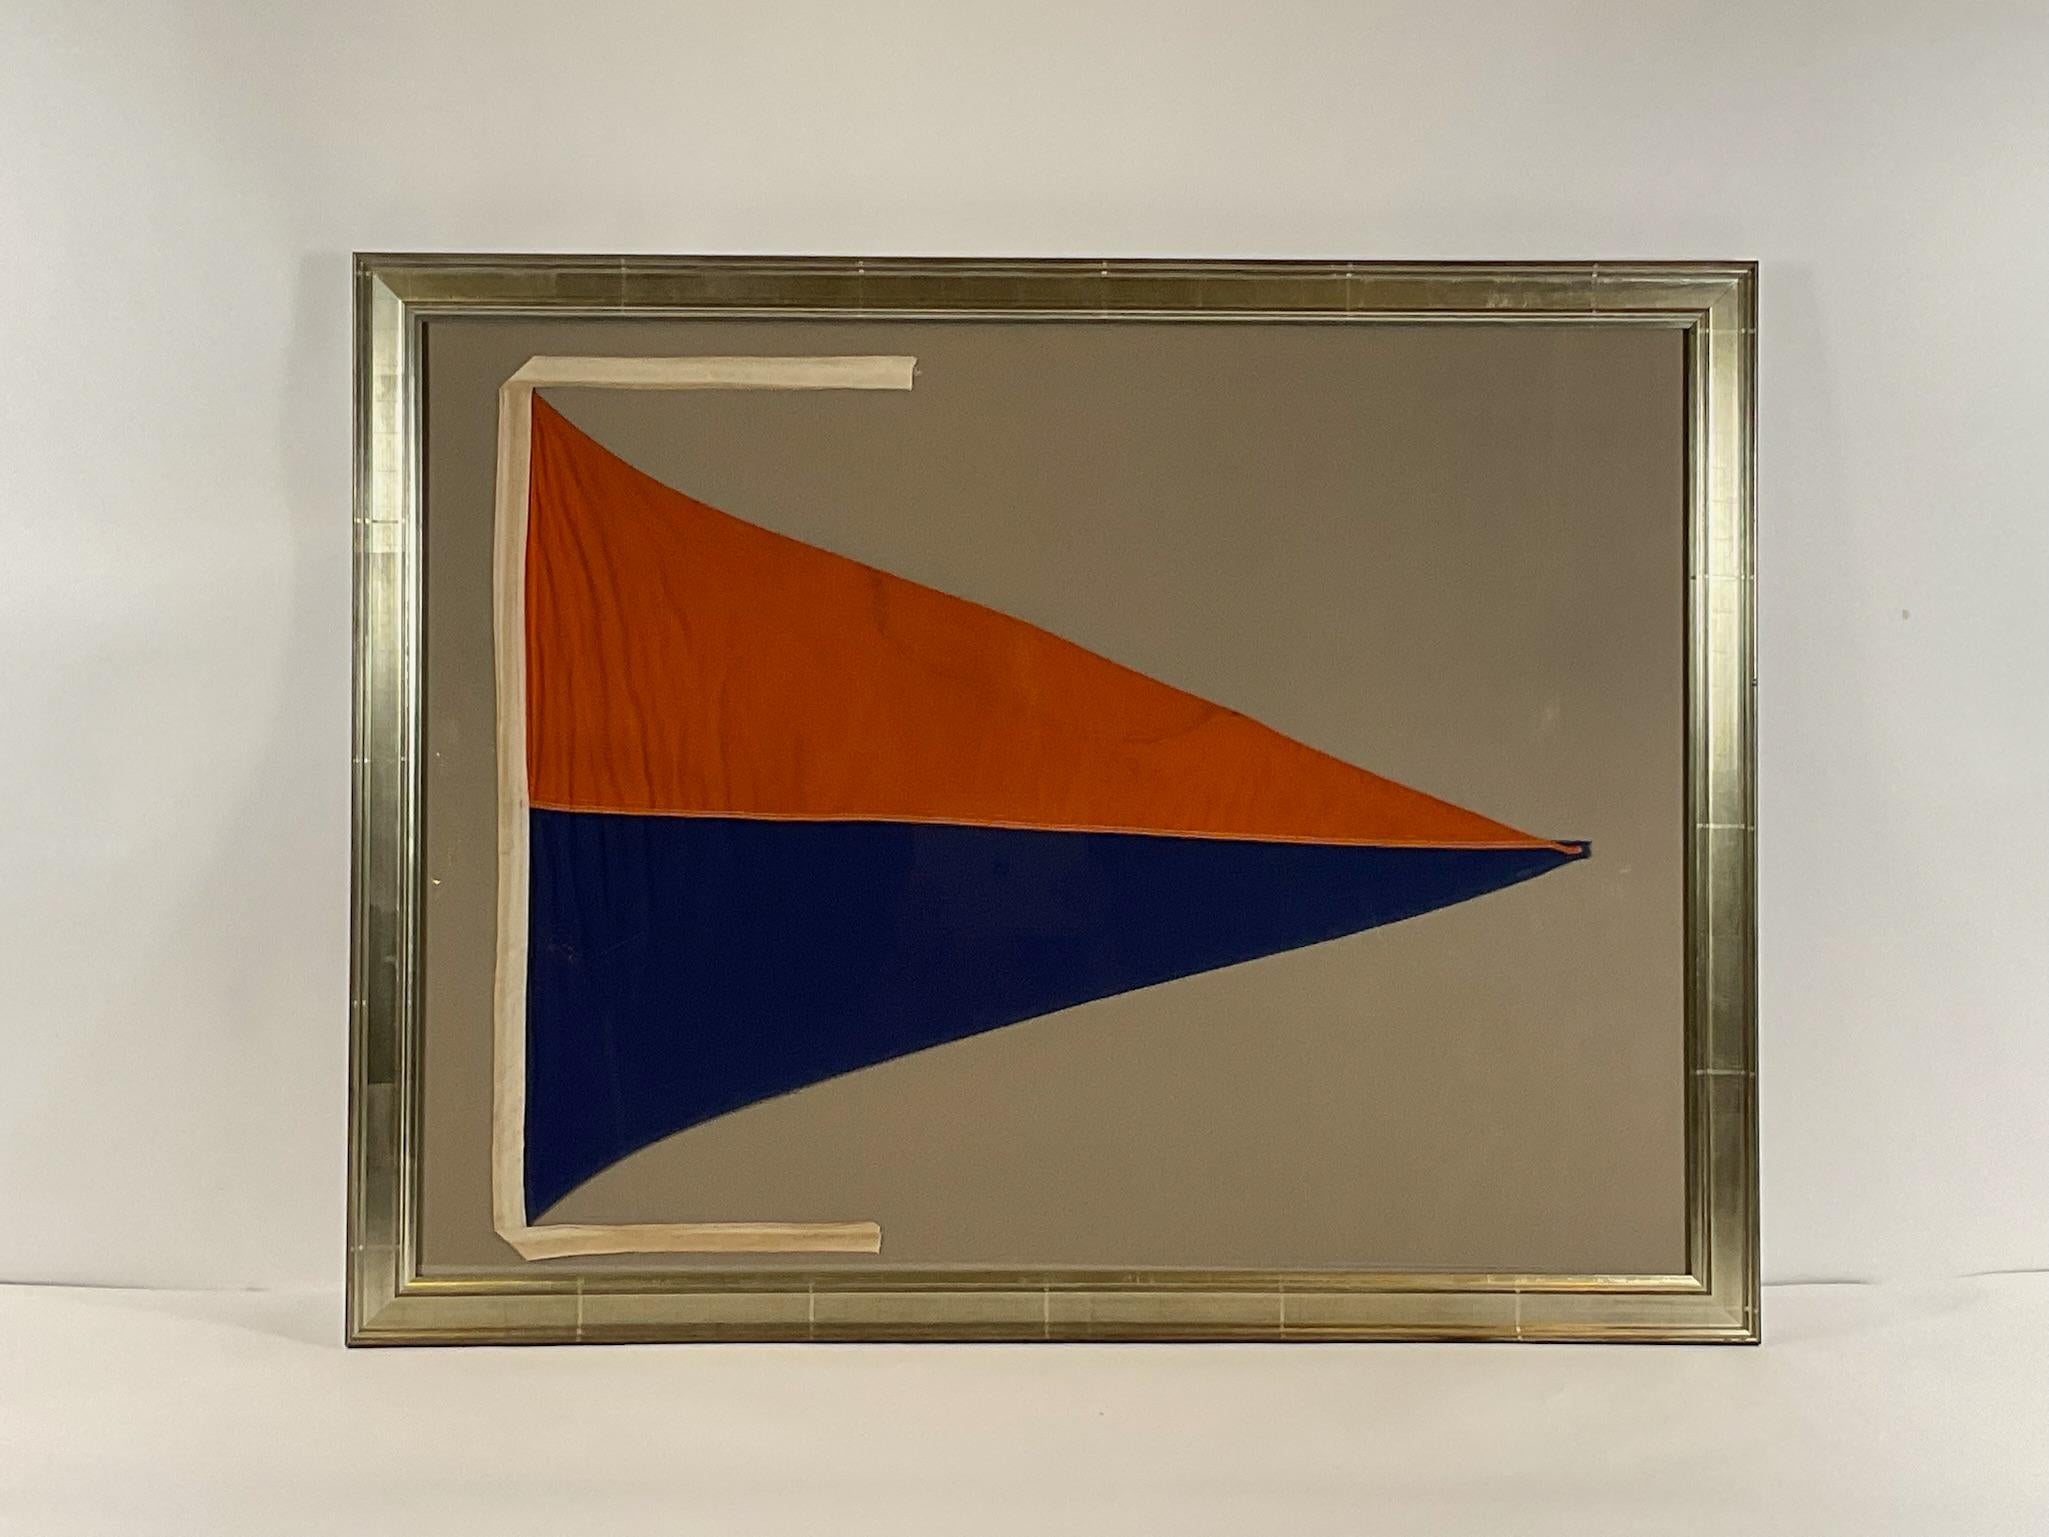 North American Large Nautical Signal Flag in Frame For Sale